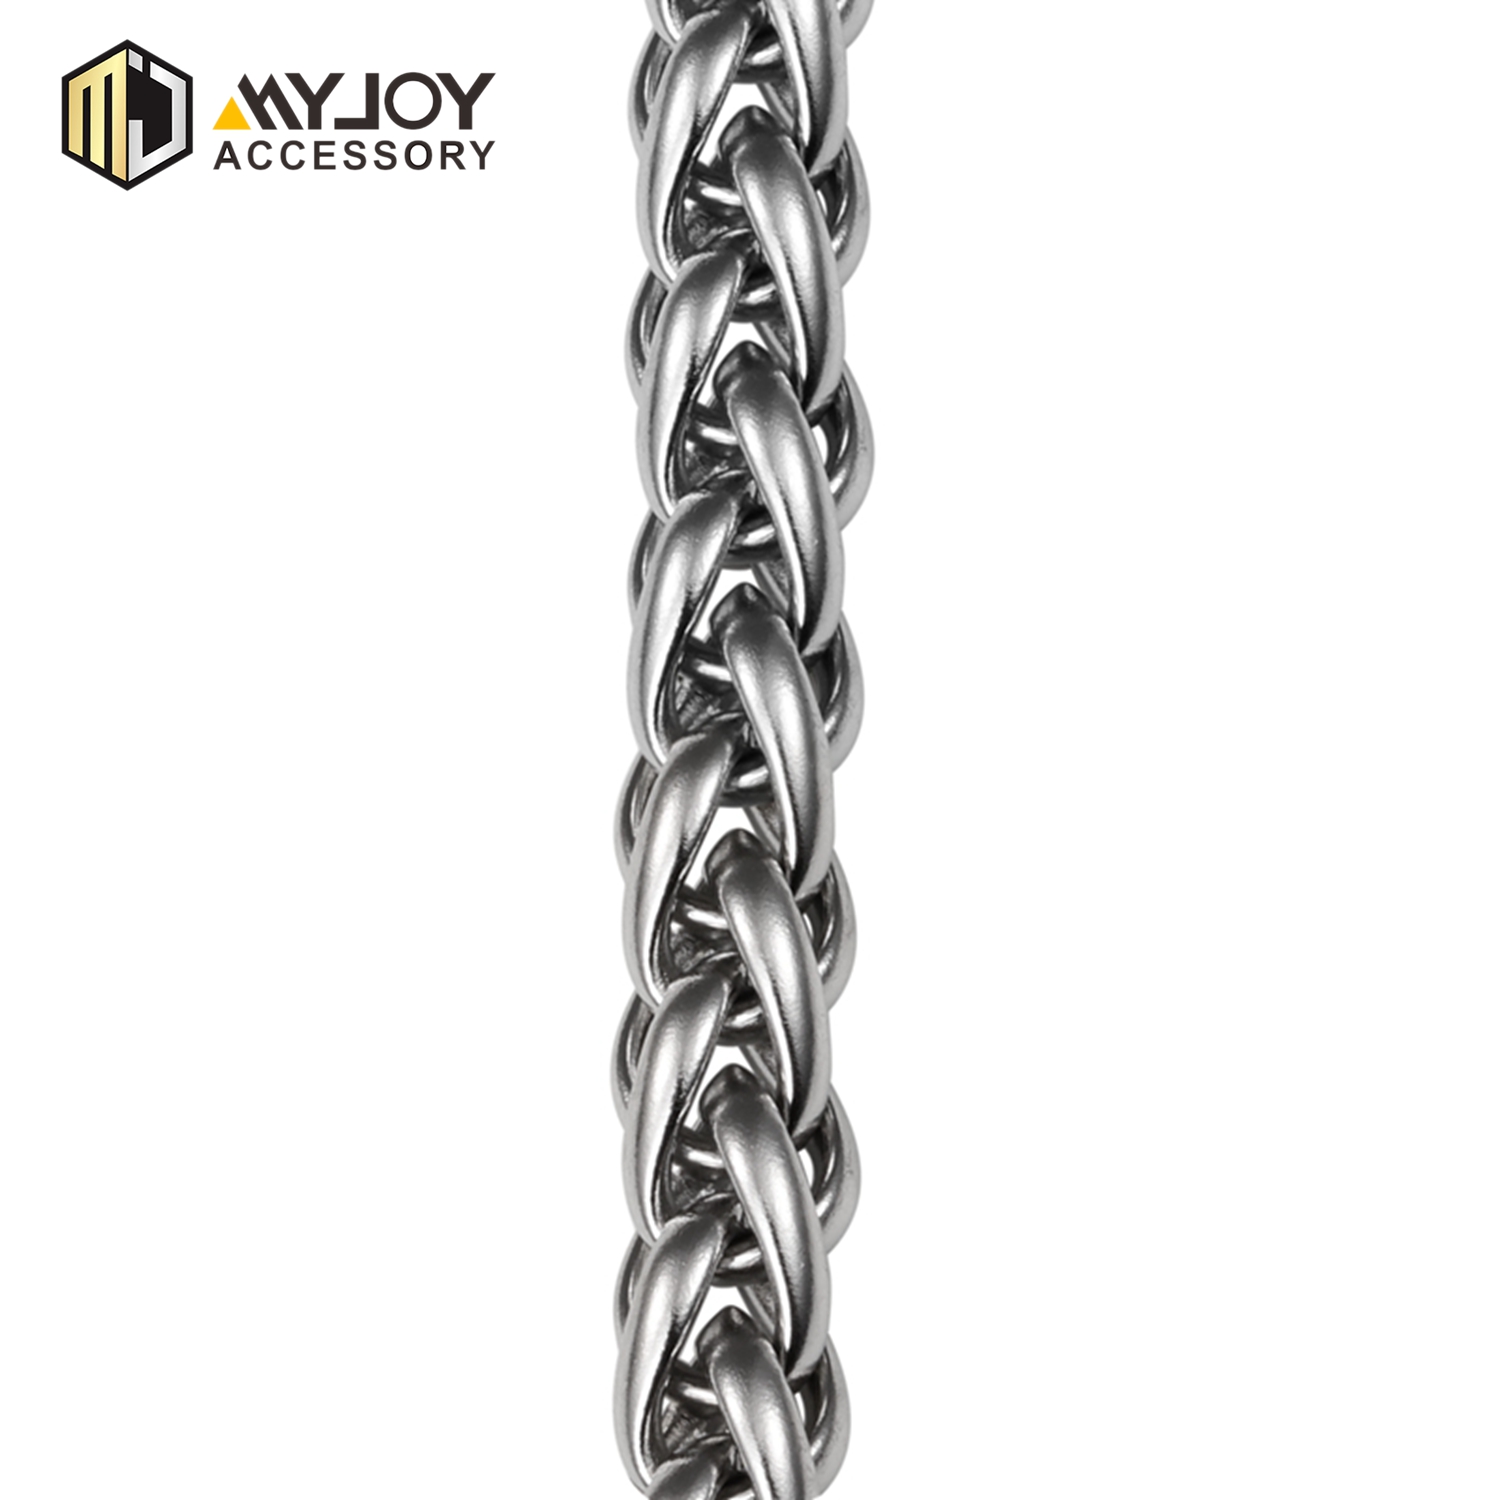 MYJOY chains chain strap Suppliers for purses-1